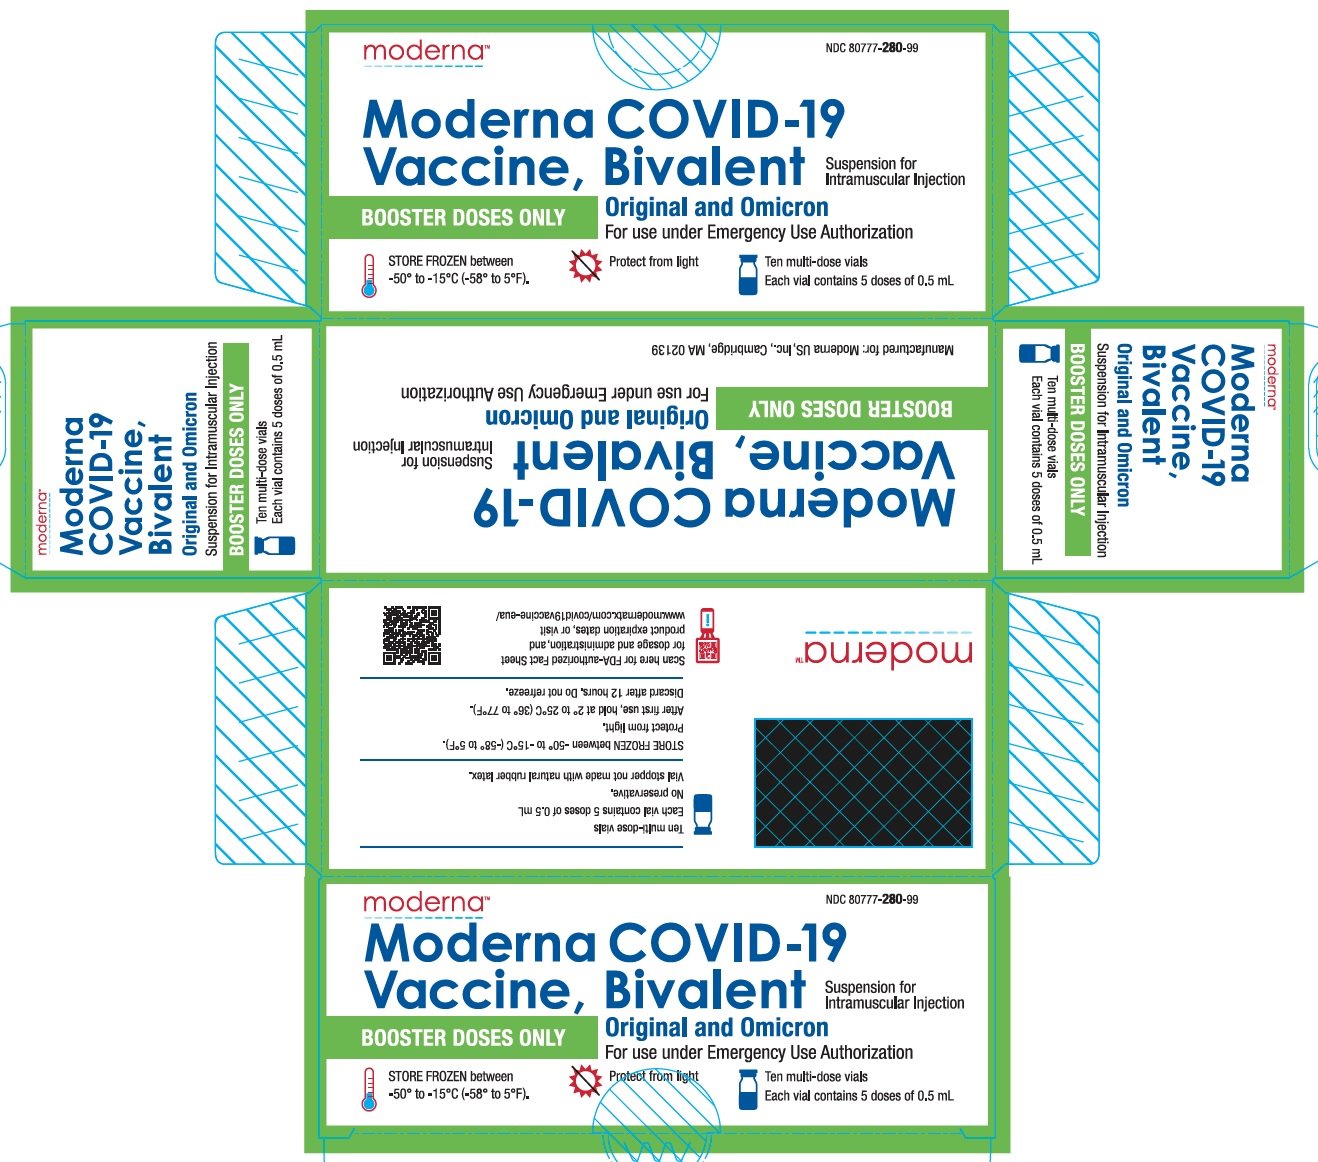 Moderna COVID-19 Vaccine, Bivalent Suspension for Intramuscular Injection for use under Emergency Use Authorization-Booster Doses Only-Carton (5 doses of 0.5 mL)